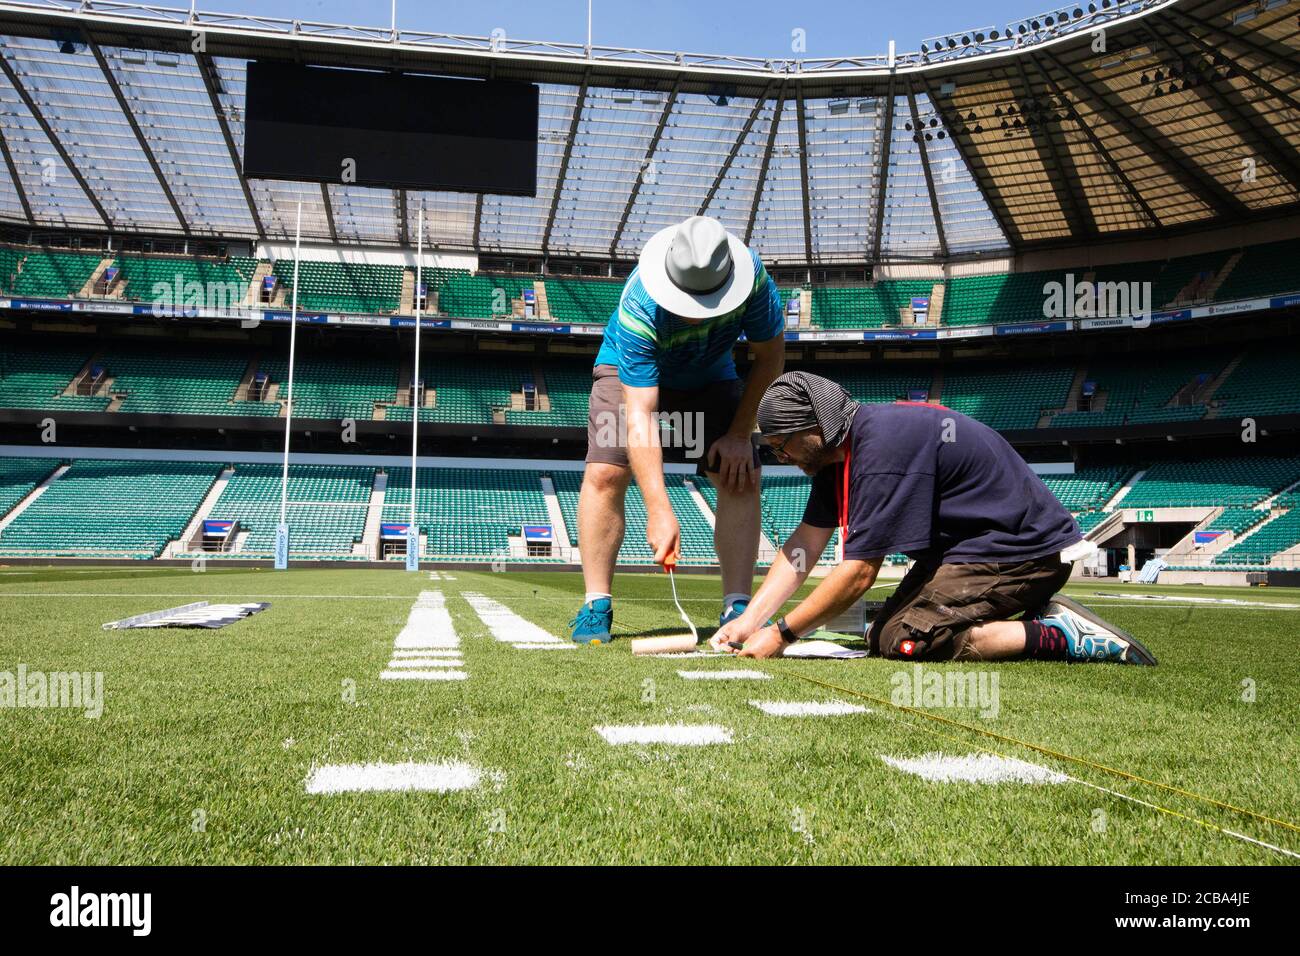 A team of artists work on portraits of rugby players Joe Marler, Maro Itoje and Faf de Klerk on the pitch at Twickenham Stadium in London to celebrate the restart of Gallagher Premiership Rugby on Friday, August 14th when Harlequins take on Sale Sharks at 7:45pm. Stock Photo